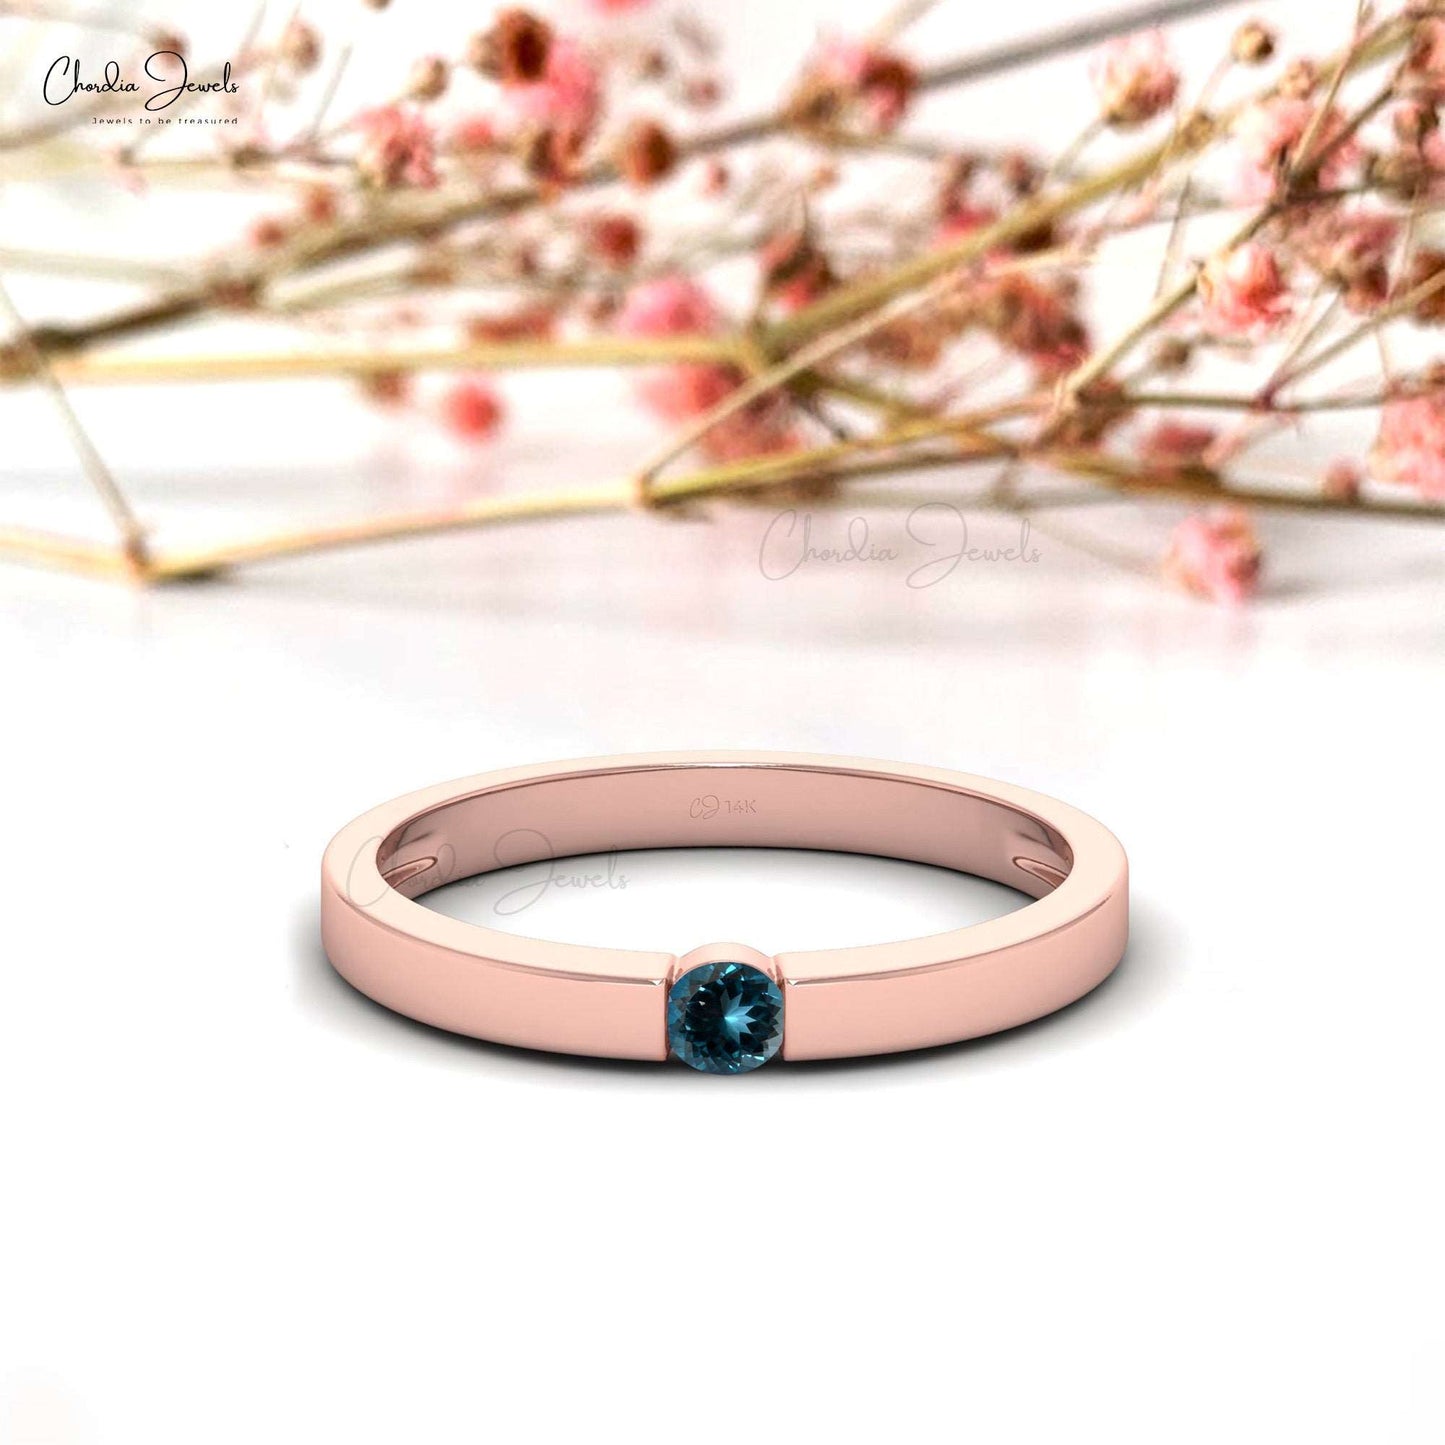 1.05 Carats Natural London Blue Topaz Dainty Ring, 14K Solid Gold Gemstone Solitaire Ring For Anniversary Gift